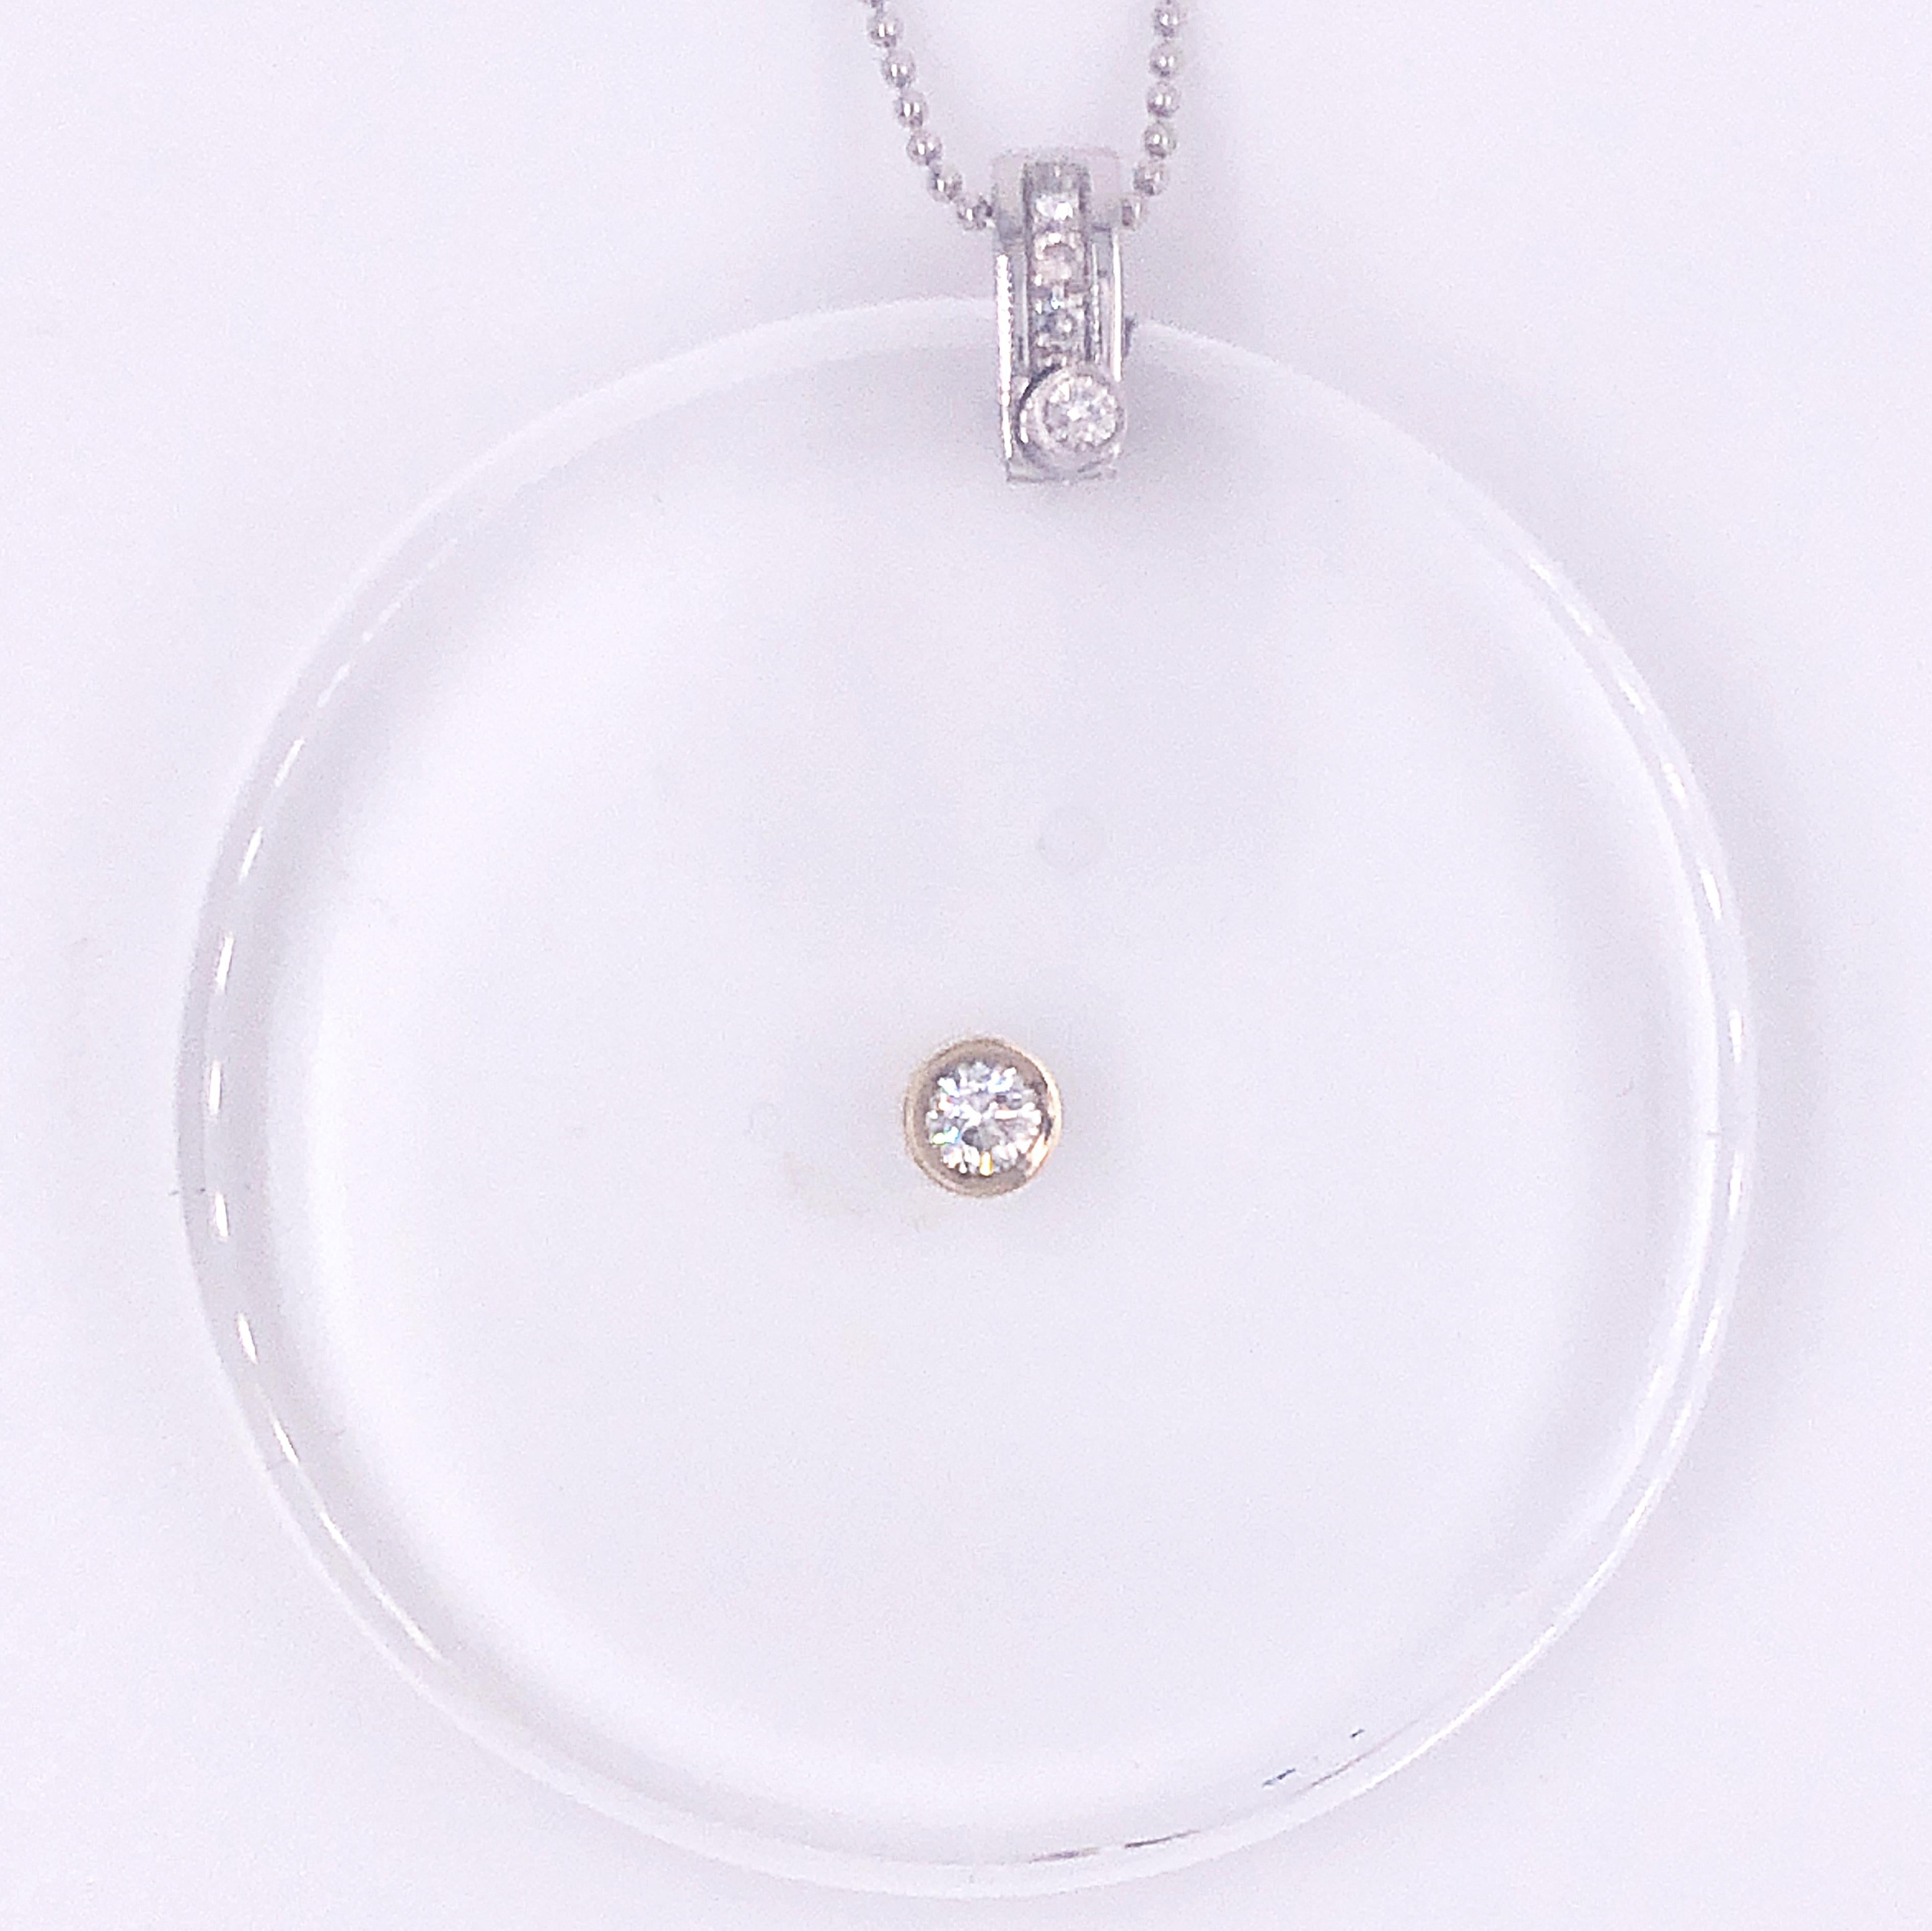 A very chic, timeless, yet not traditional Round Shaped Pendant featuring a 0.28kt Brilliant Cut White Diamond in a transparent rock crystal hand inlaid disk, 18k white gold handcrafted setting. A dark leather long ribbon is included.
A fitted beige